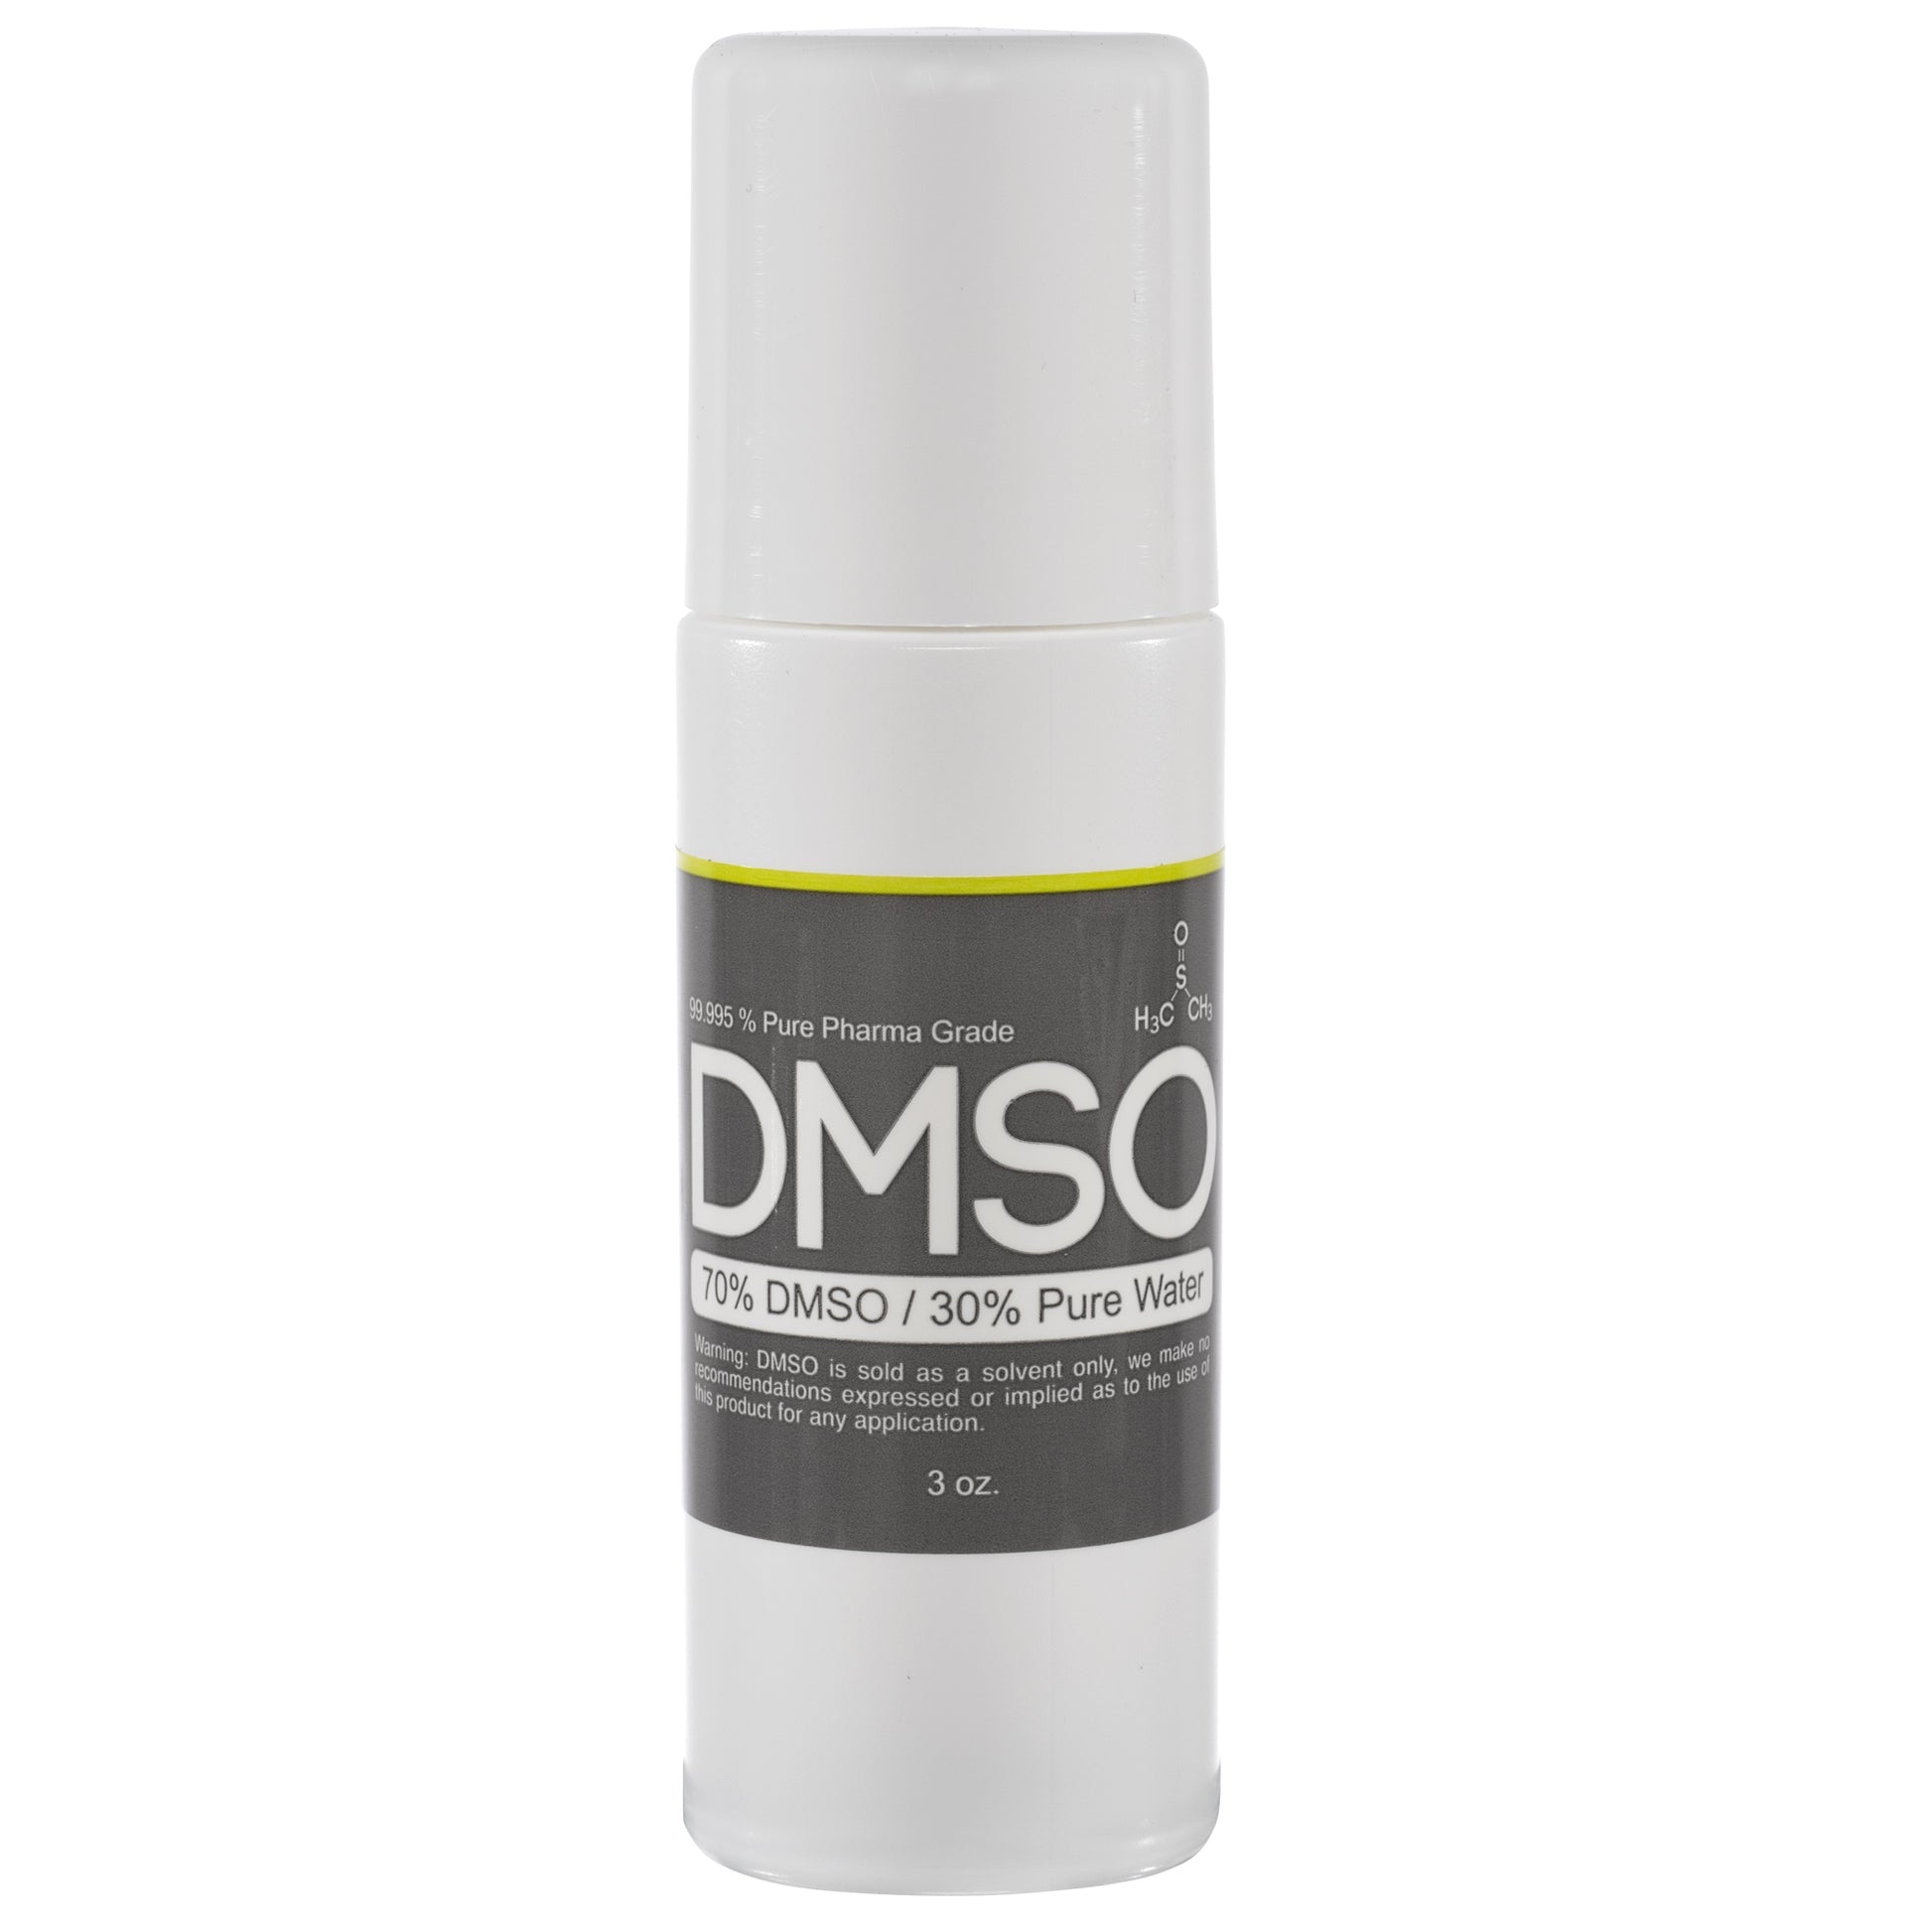 DMSO-roll-on-70-30-back-pain-3-oz-dimethyl-sulfoxide. Small white cylindrical bottle with cap screwed on. Label reads "DMSO 70% DMSO 30% Pure Water" 3 oz